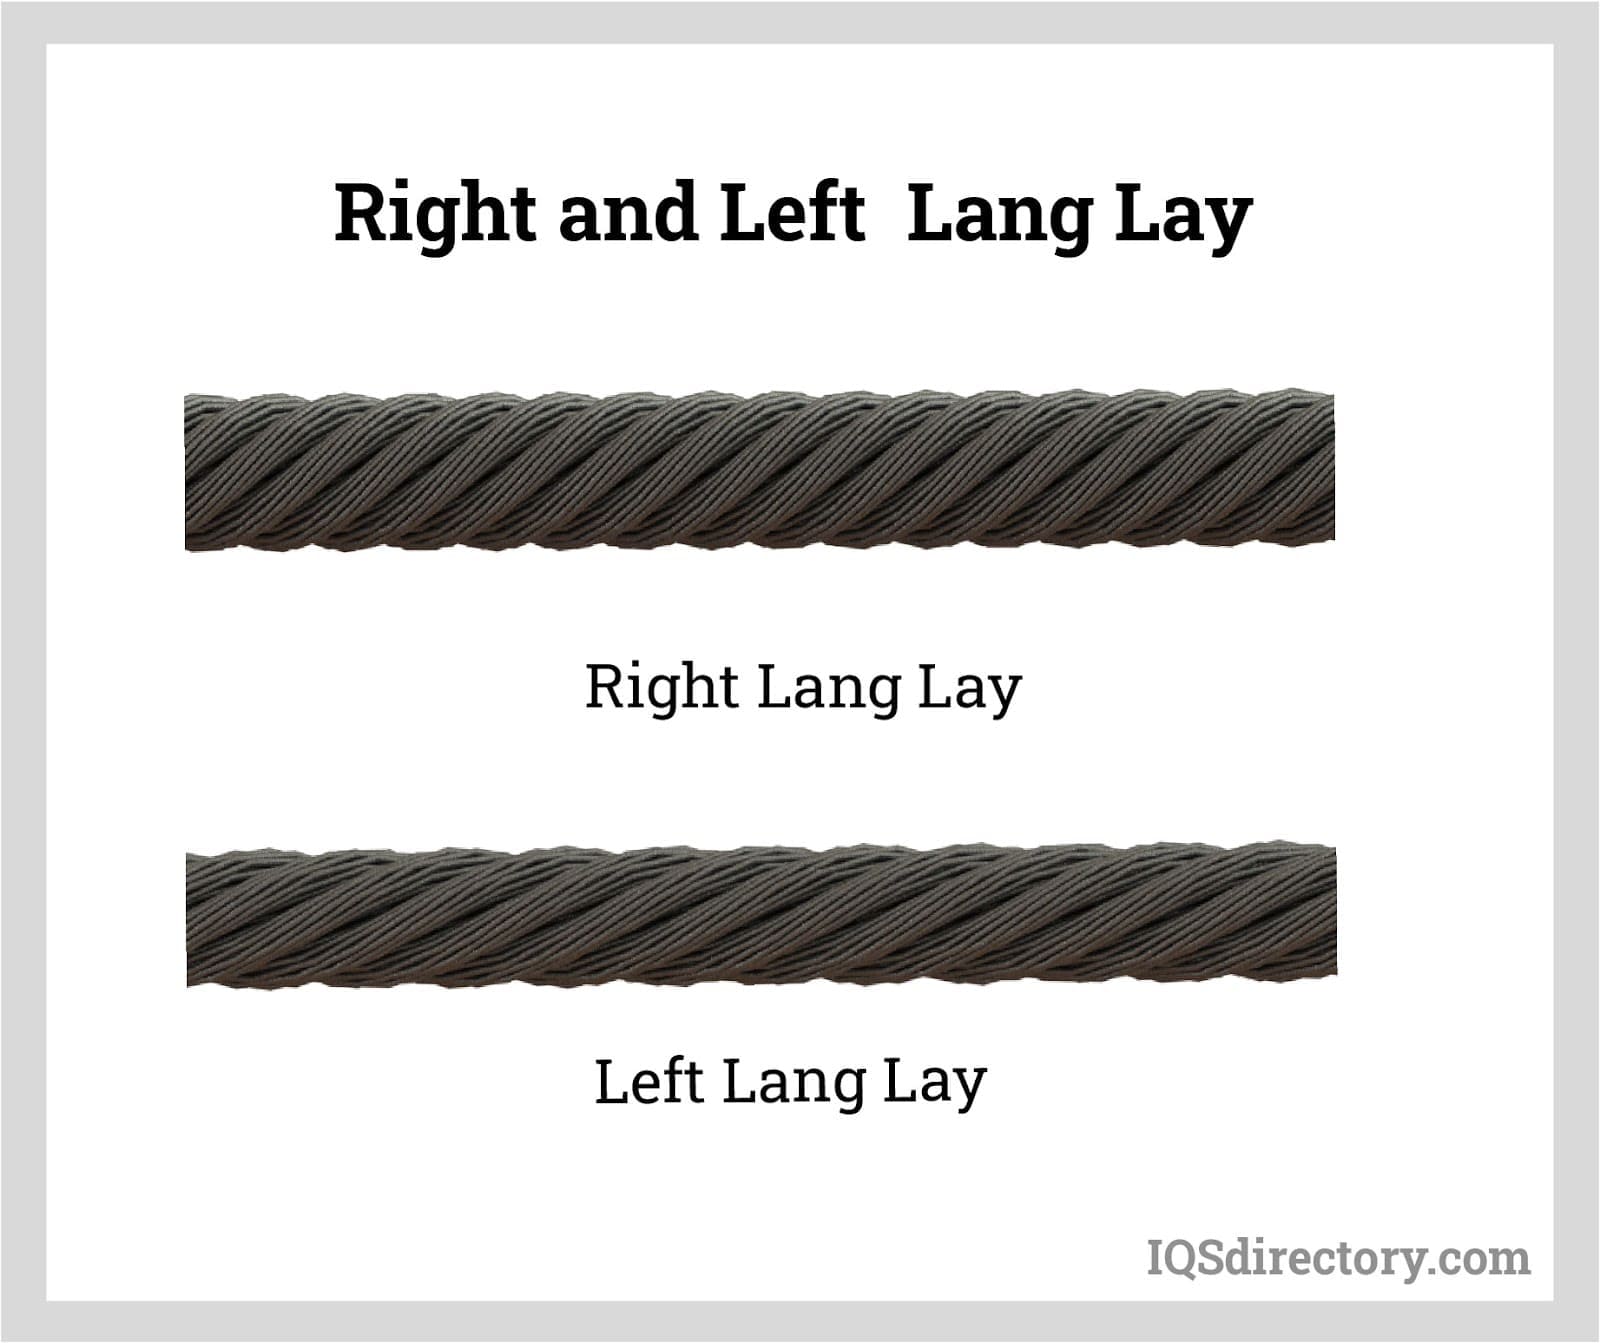 Right and Left Lang Lay